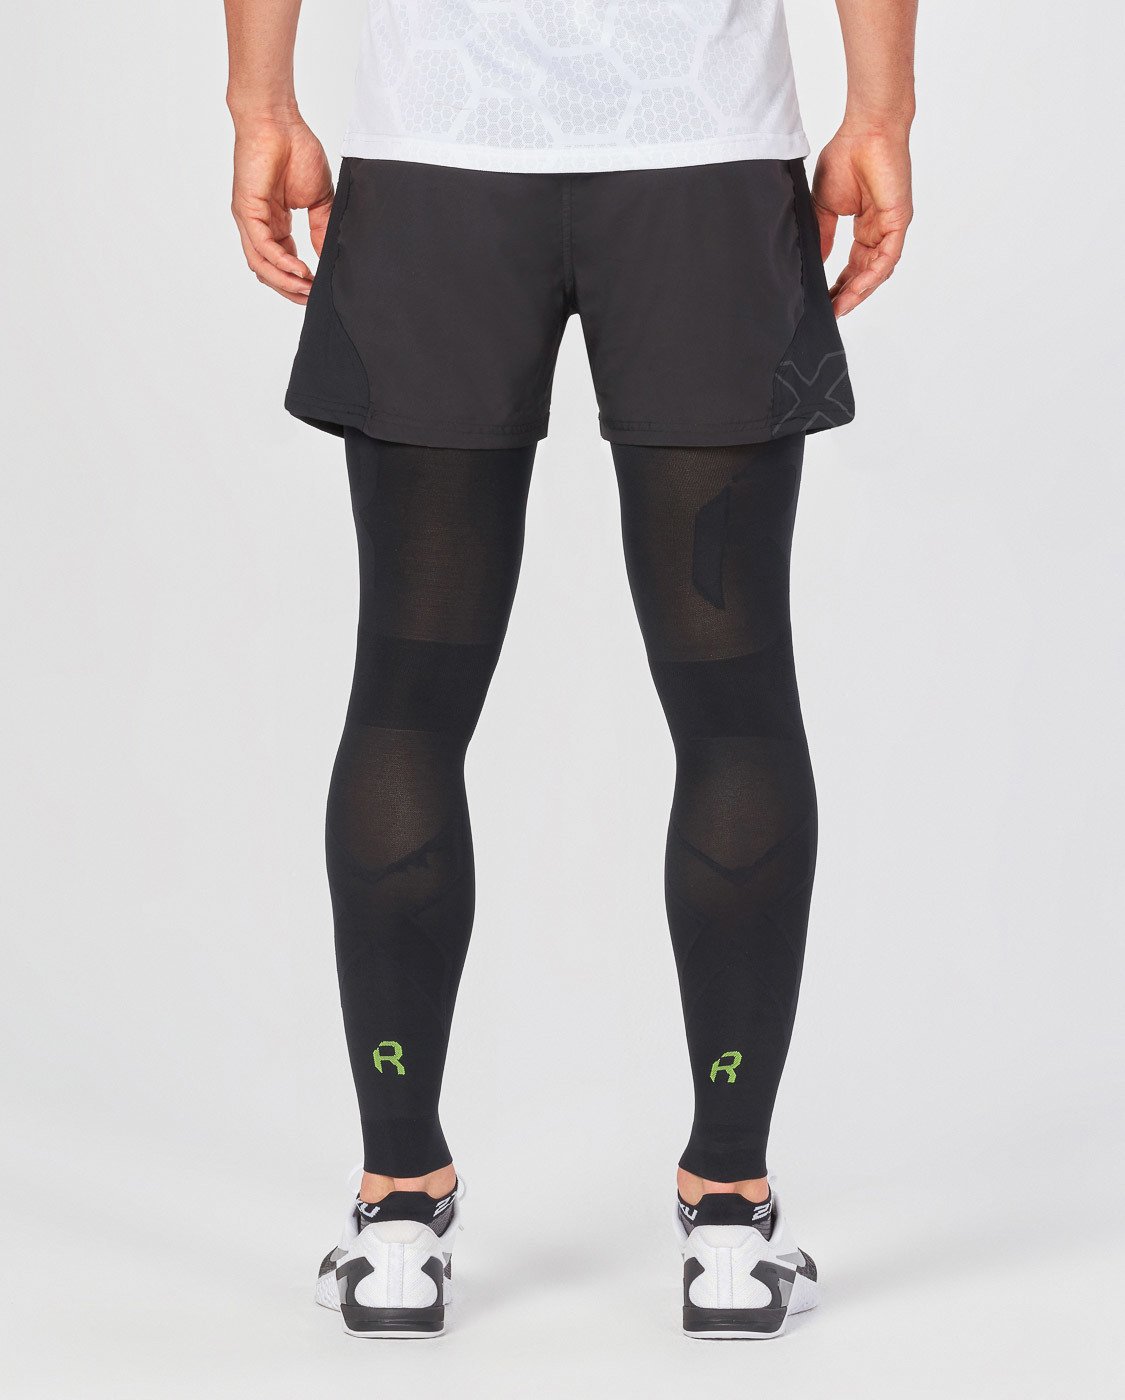 Leg Compression Sleeves for Recovery